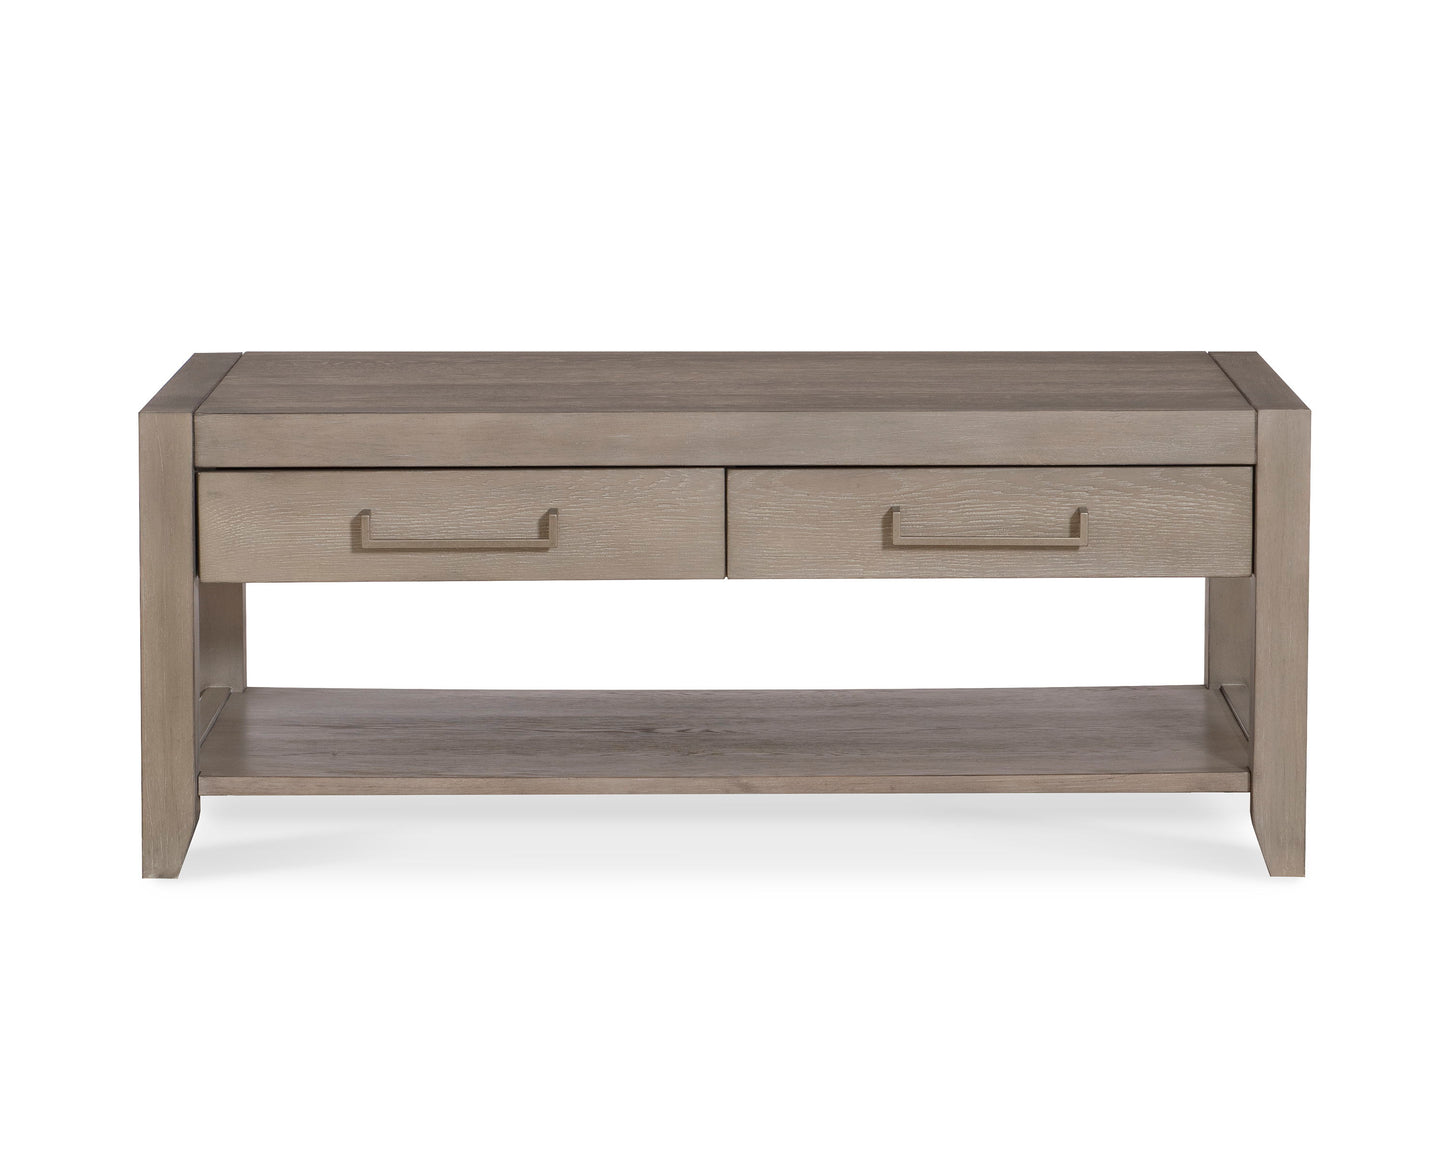 Del Mar - Coffee Table With Drawers - Beige